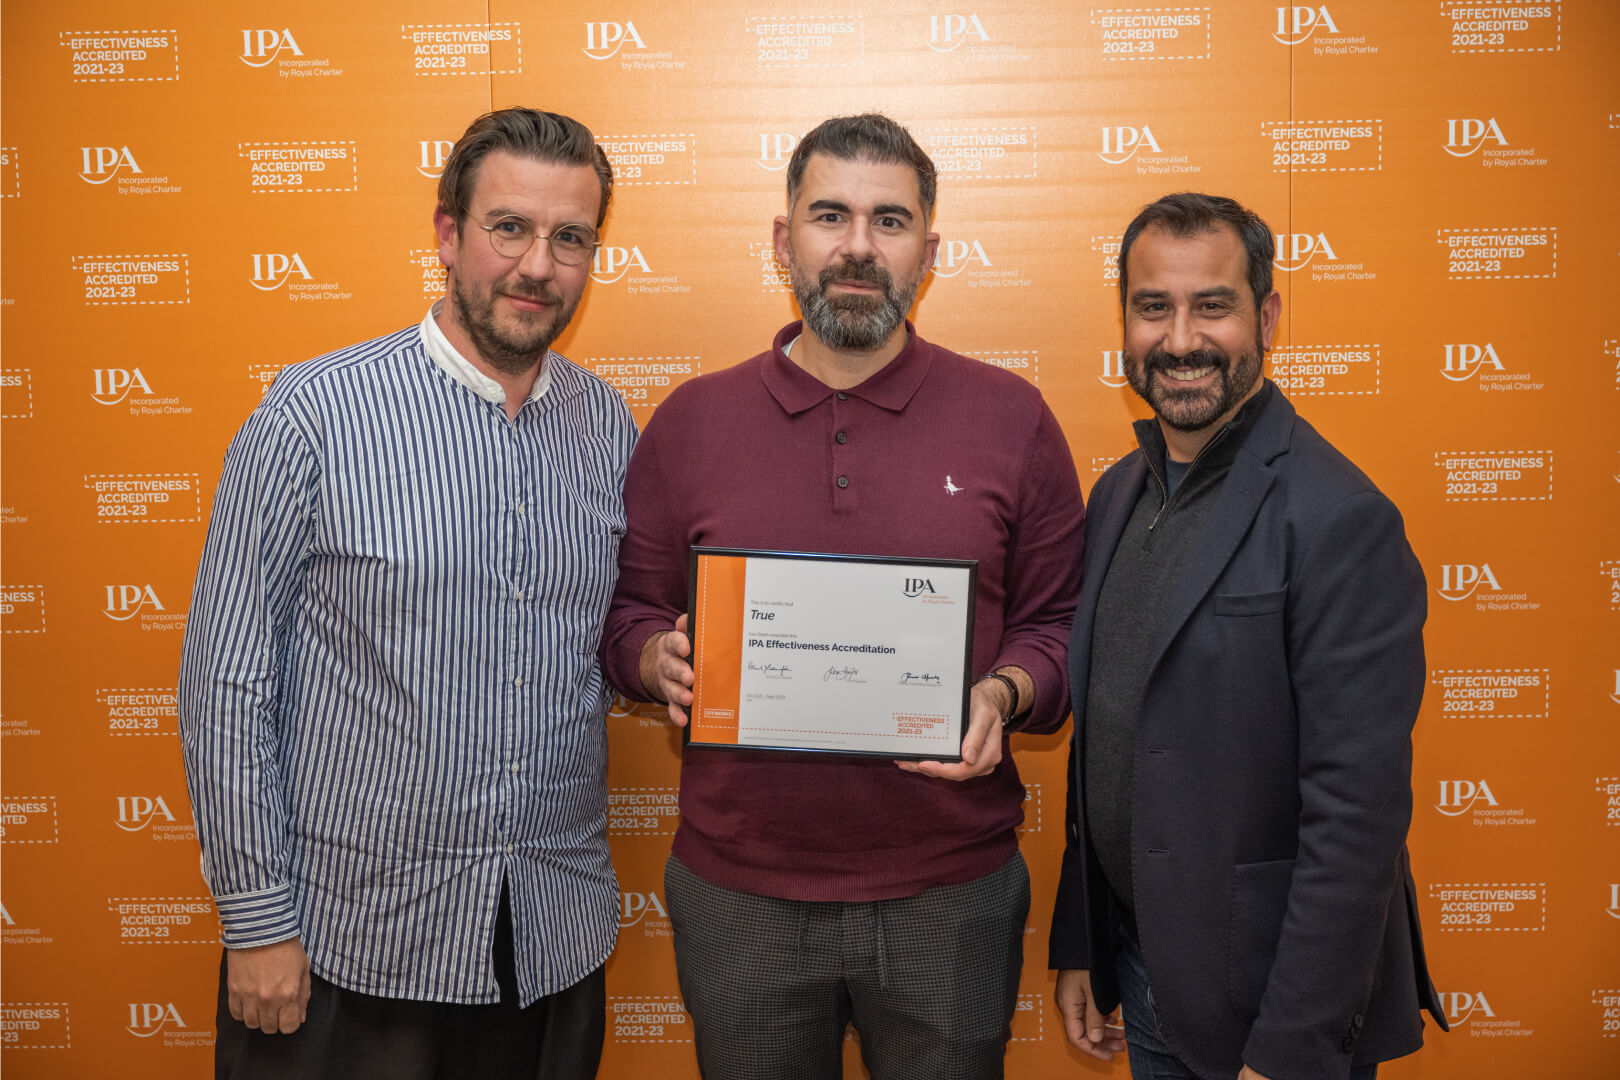 True's Founders & Head of Client Services standing in front of an orange background with the IPA logo on holding their IPA Effectiveness Accreditation certificate